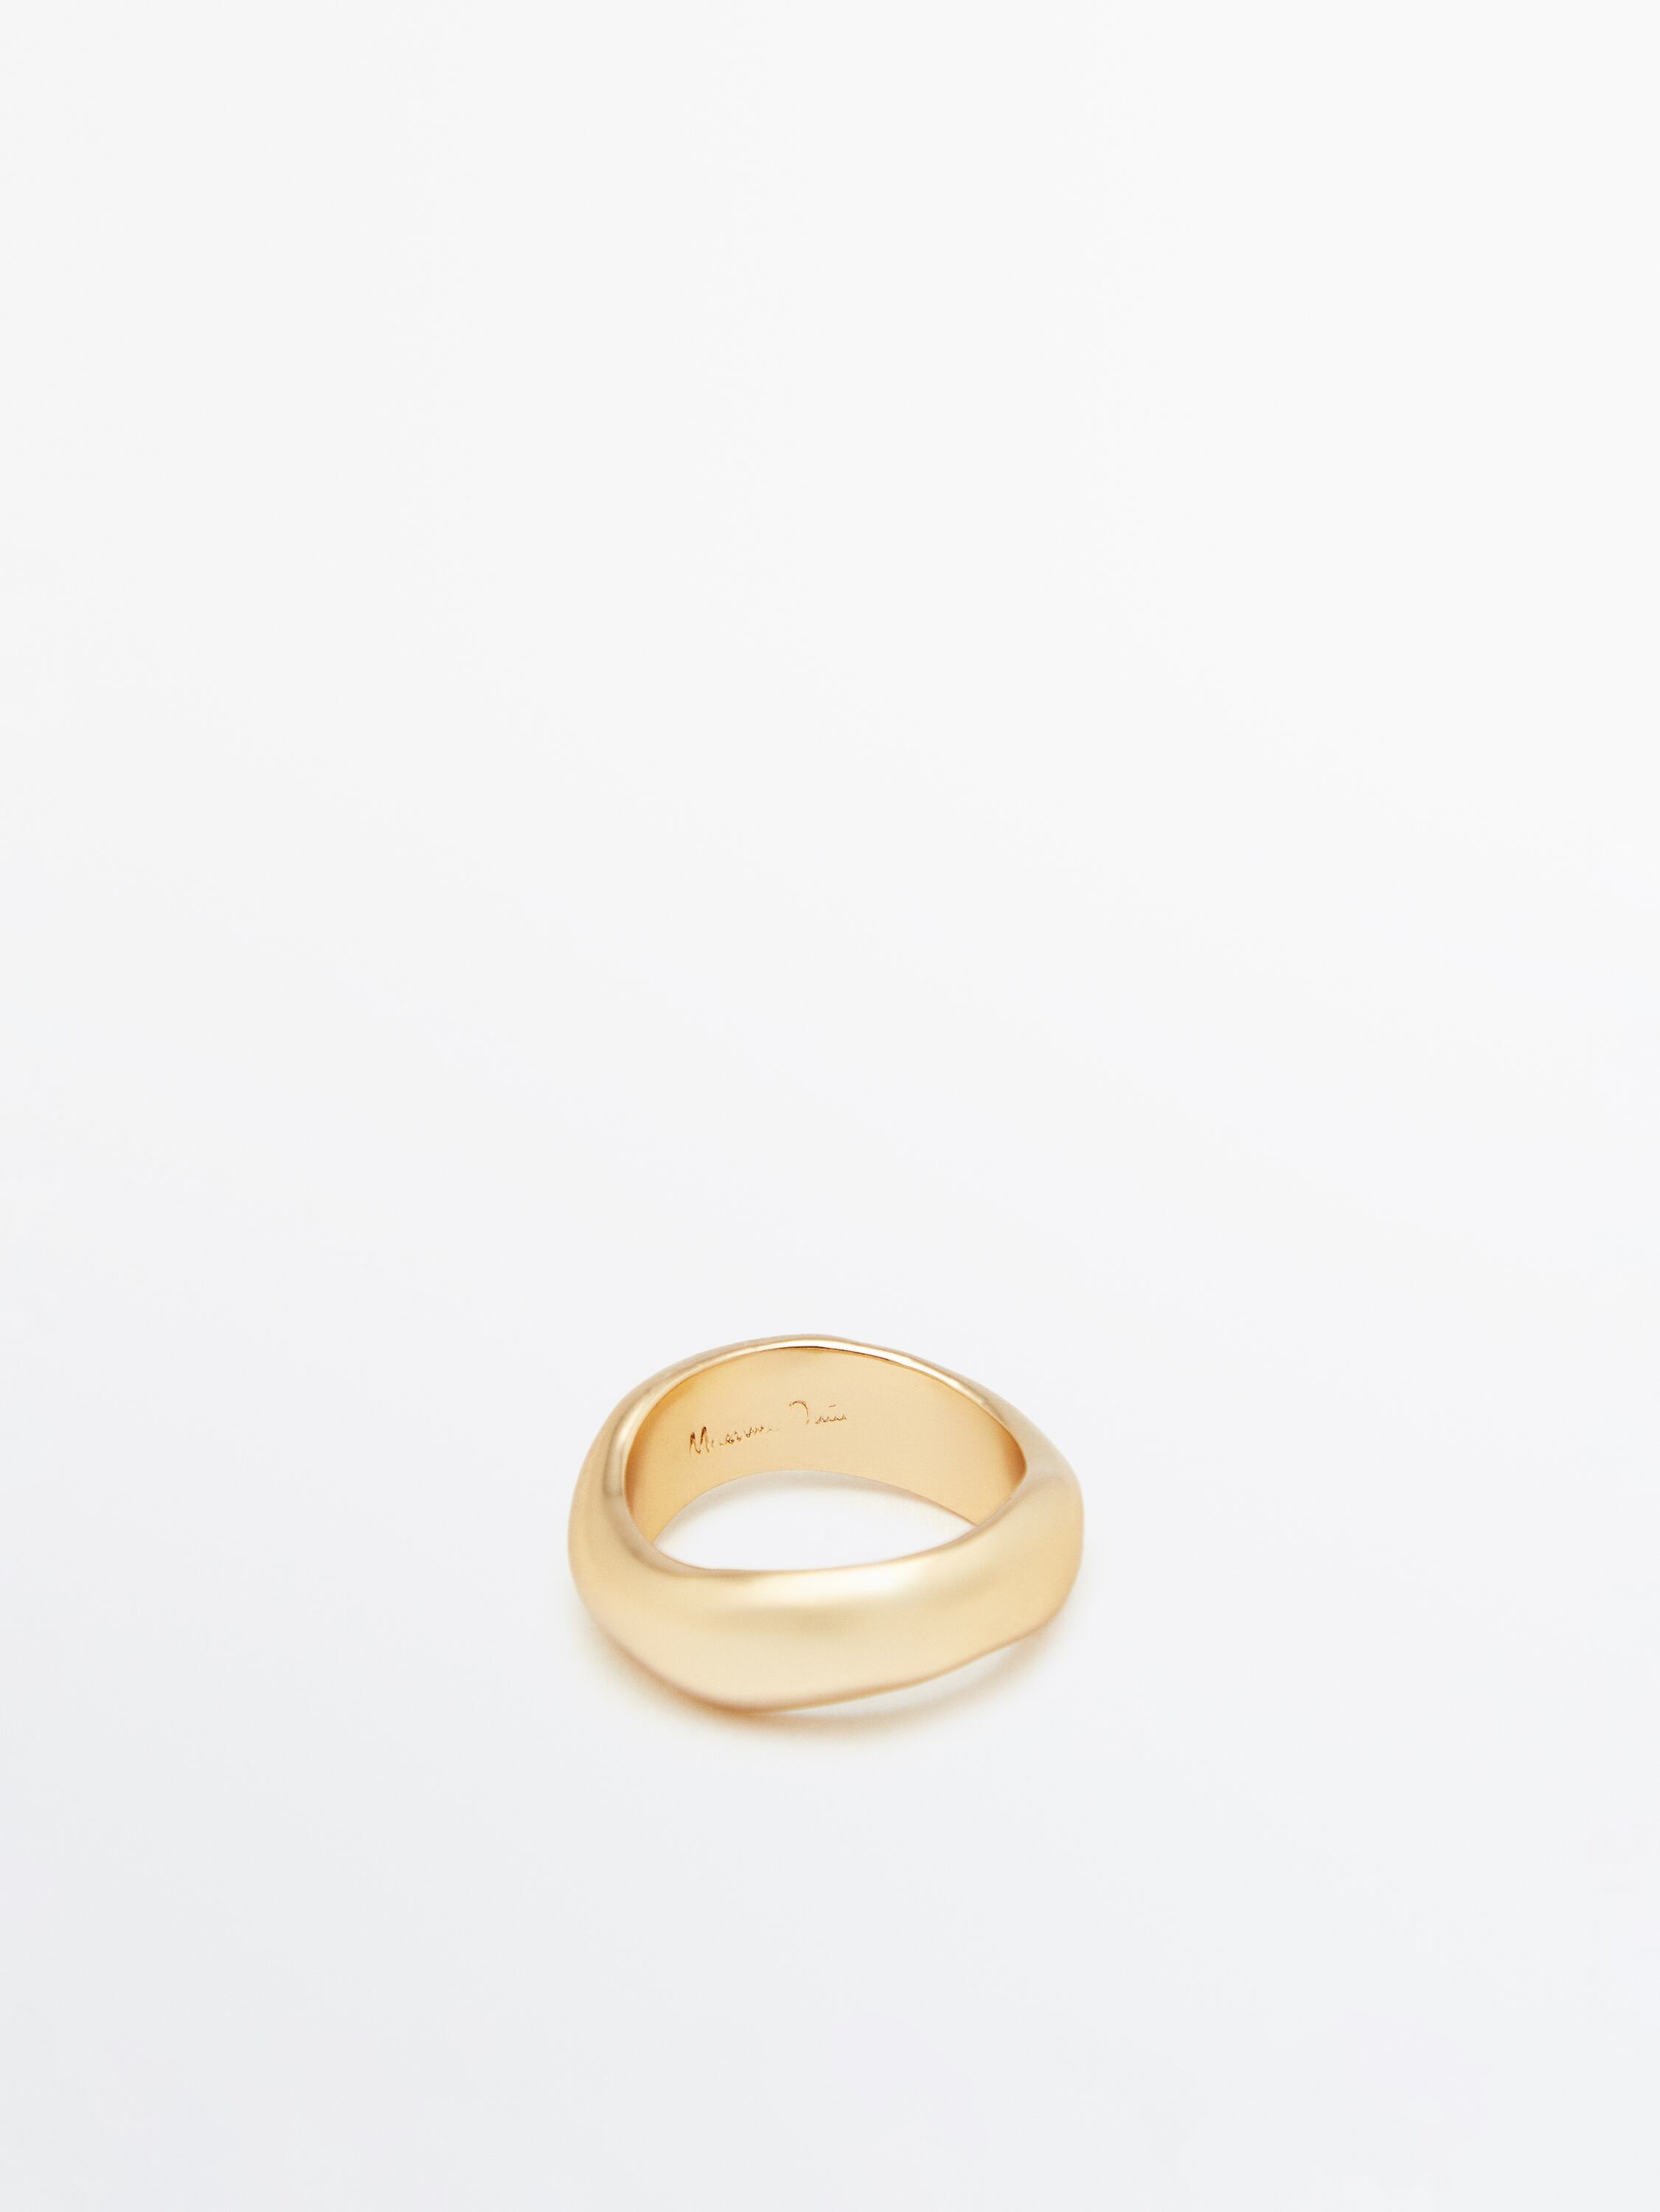 Pack of gold-plated asymmetric rings